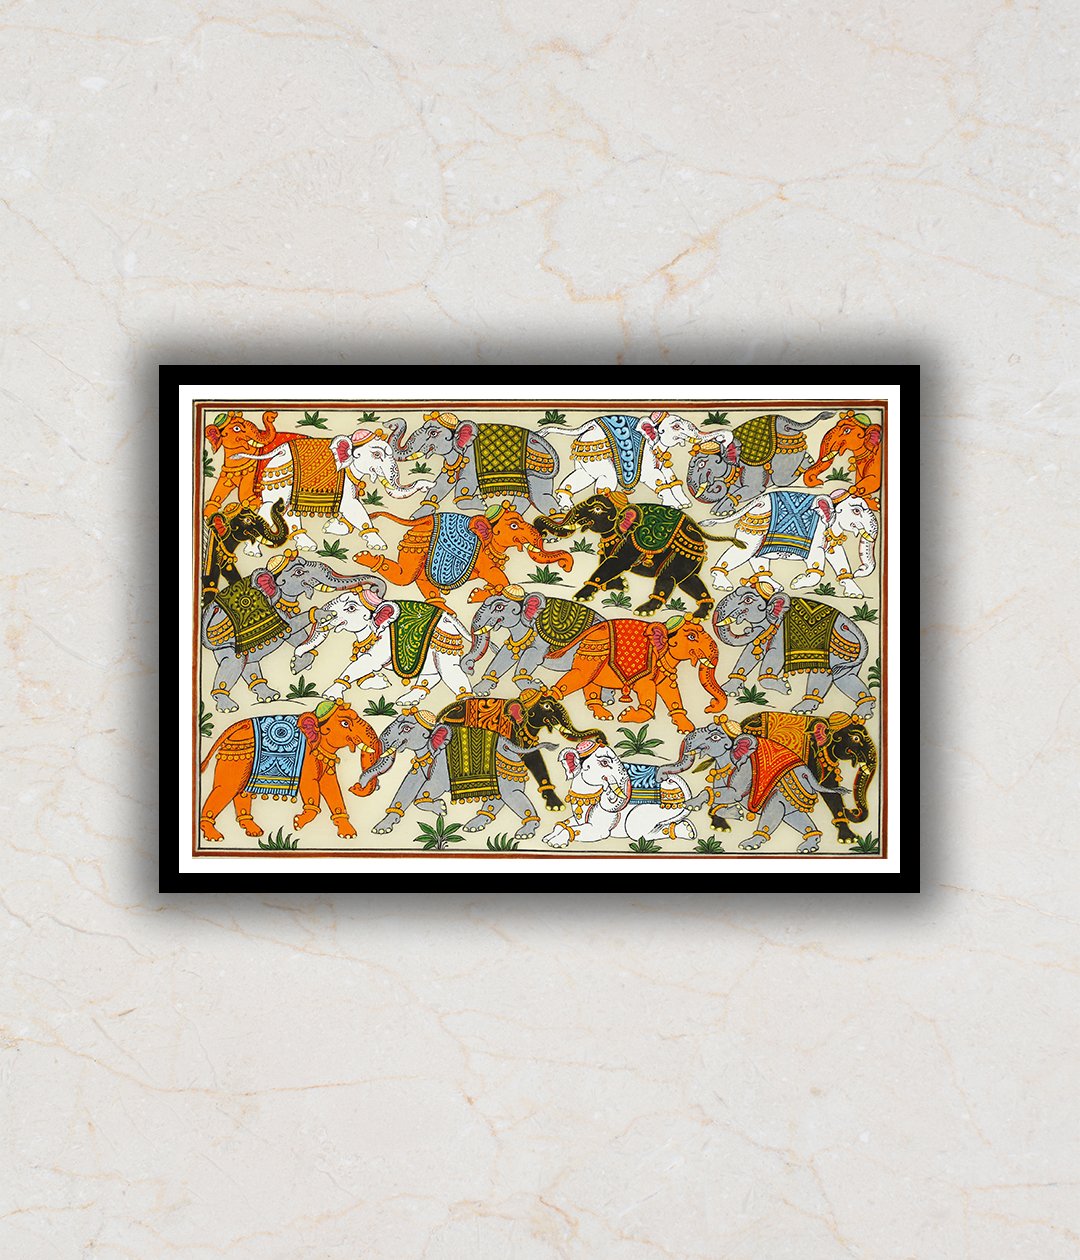 Herd of Elephants Pattachitra Art Painting For Home Wall Art Decor